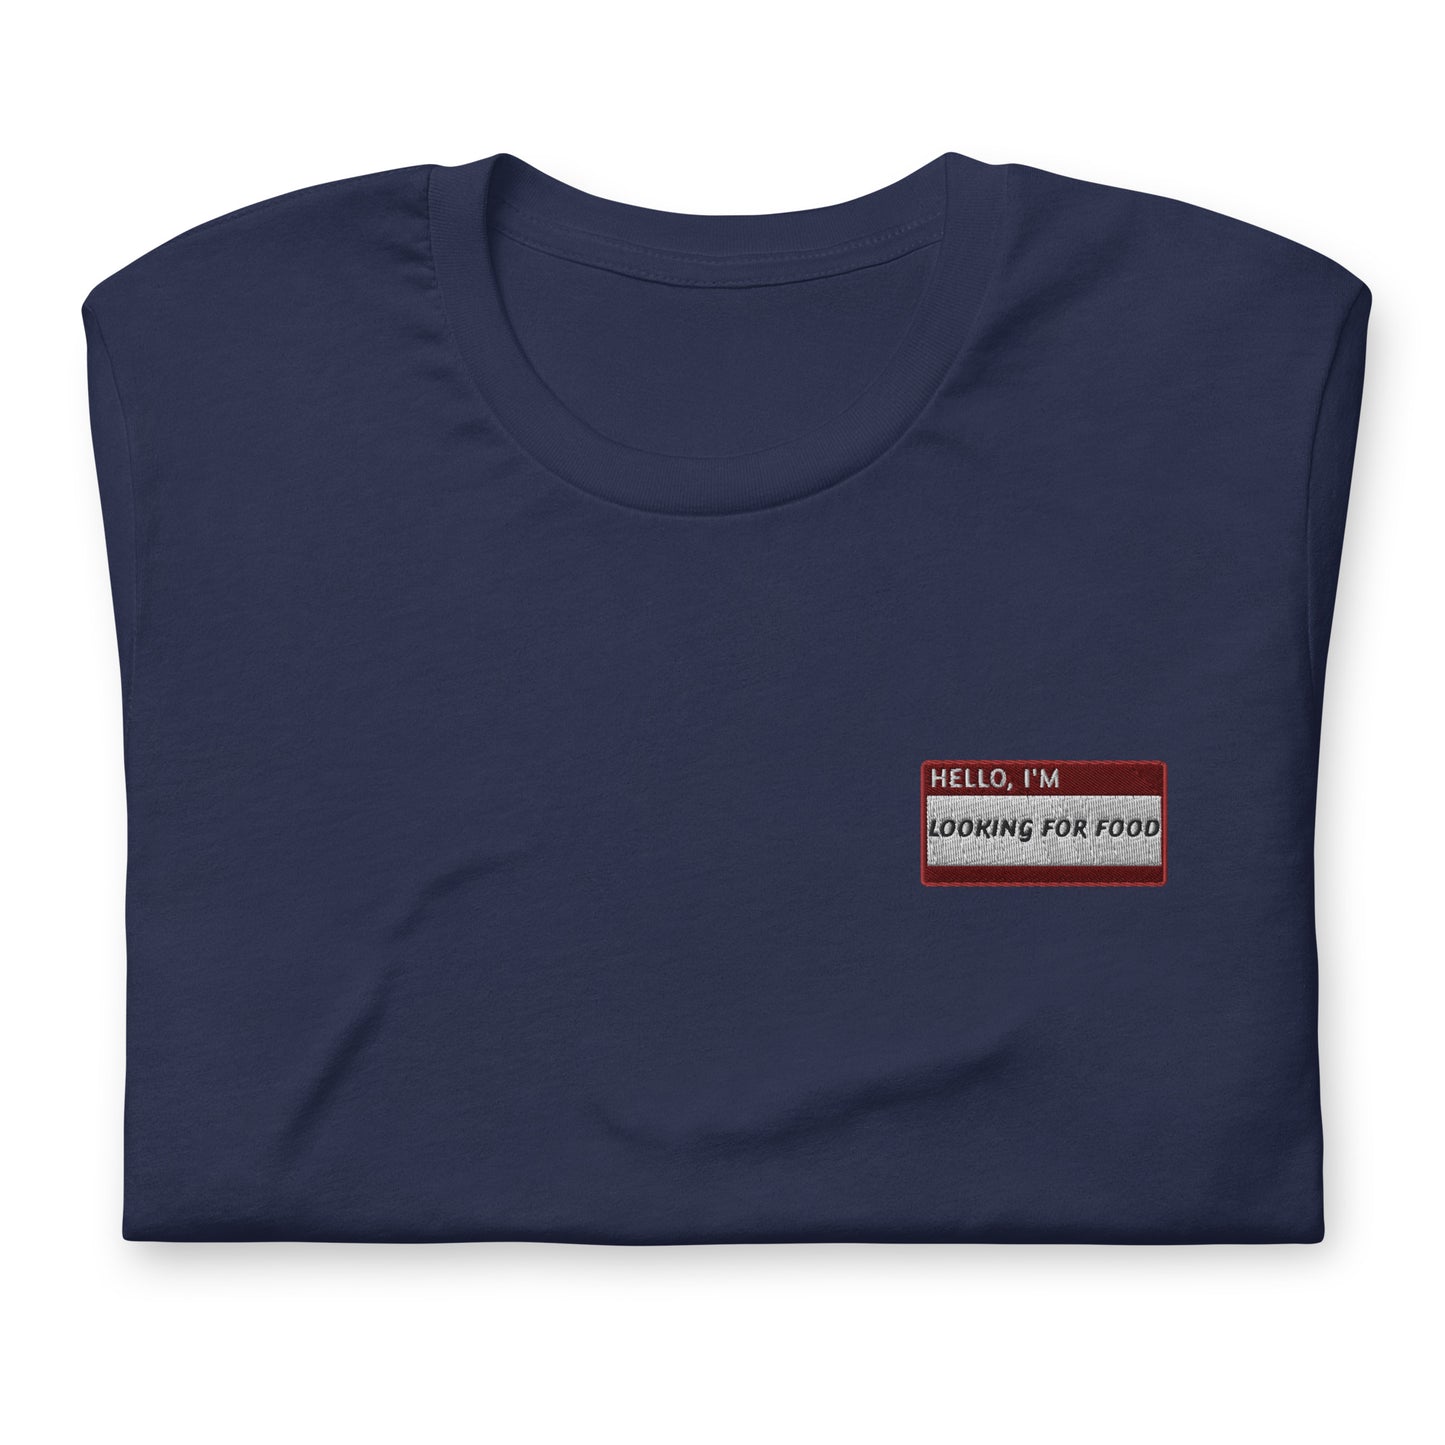 HELLO I'M LOOKING FOR FOOD - Name Tag T-Shirt